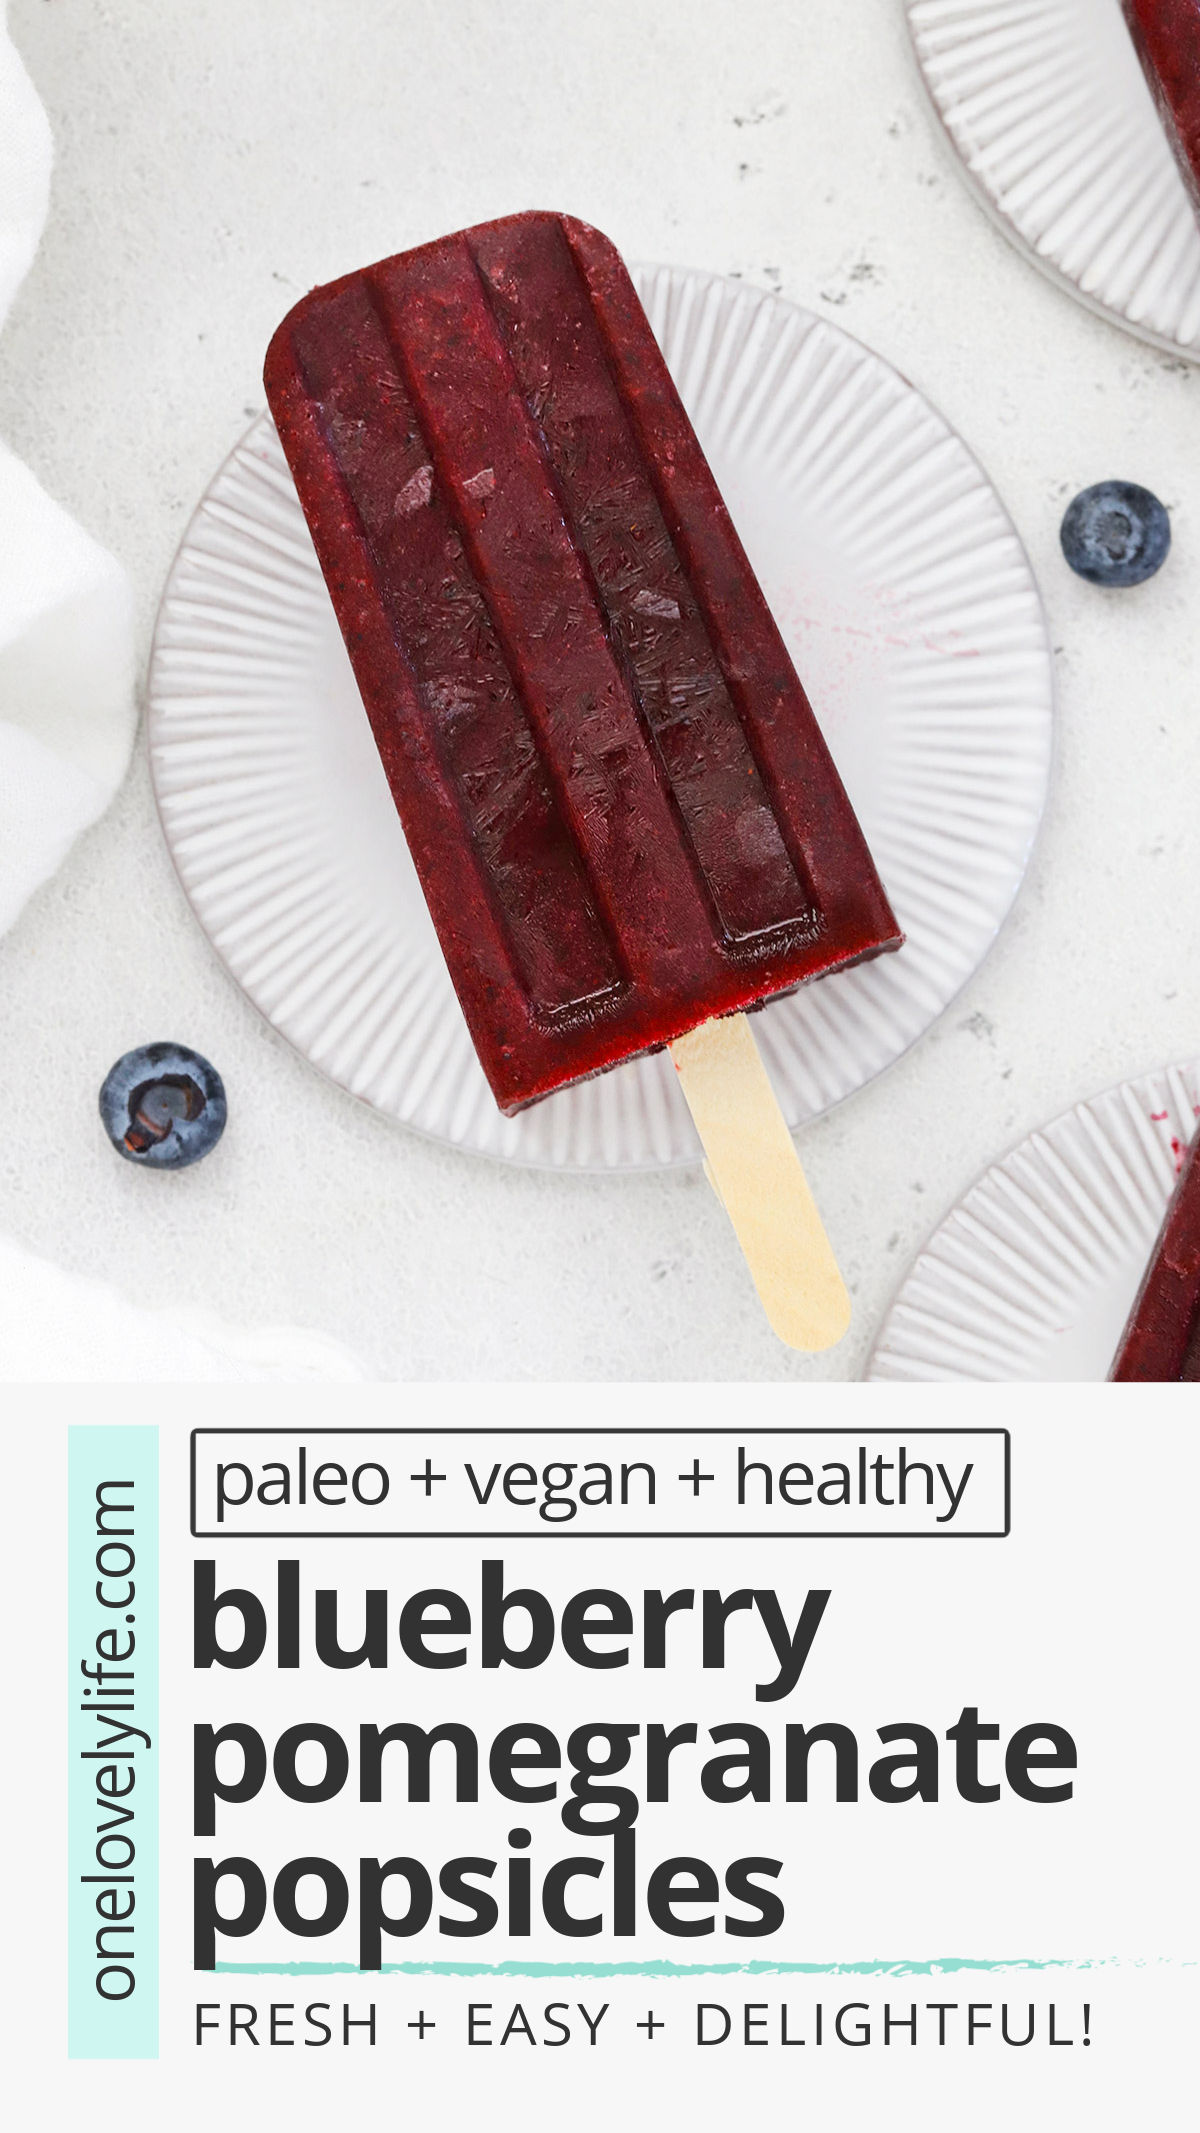 Blueberry Pomegranate Popsicles - These healthy blueberry popsicles are made of 100% fruit and have a creamy sorbet-like texture you'll fall in love with! // Blueberry Popsicles No Sugar // Blueberry Popsicles Without Yogurt // Homemade Blueberry Popsicles // pomegranate popsicles // berry popsicles // healthy popsicles